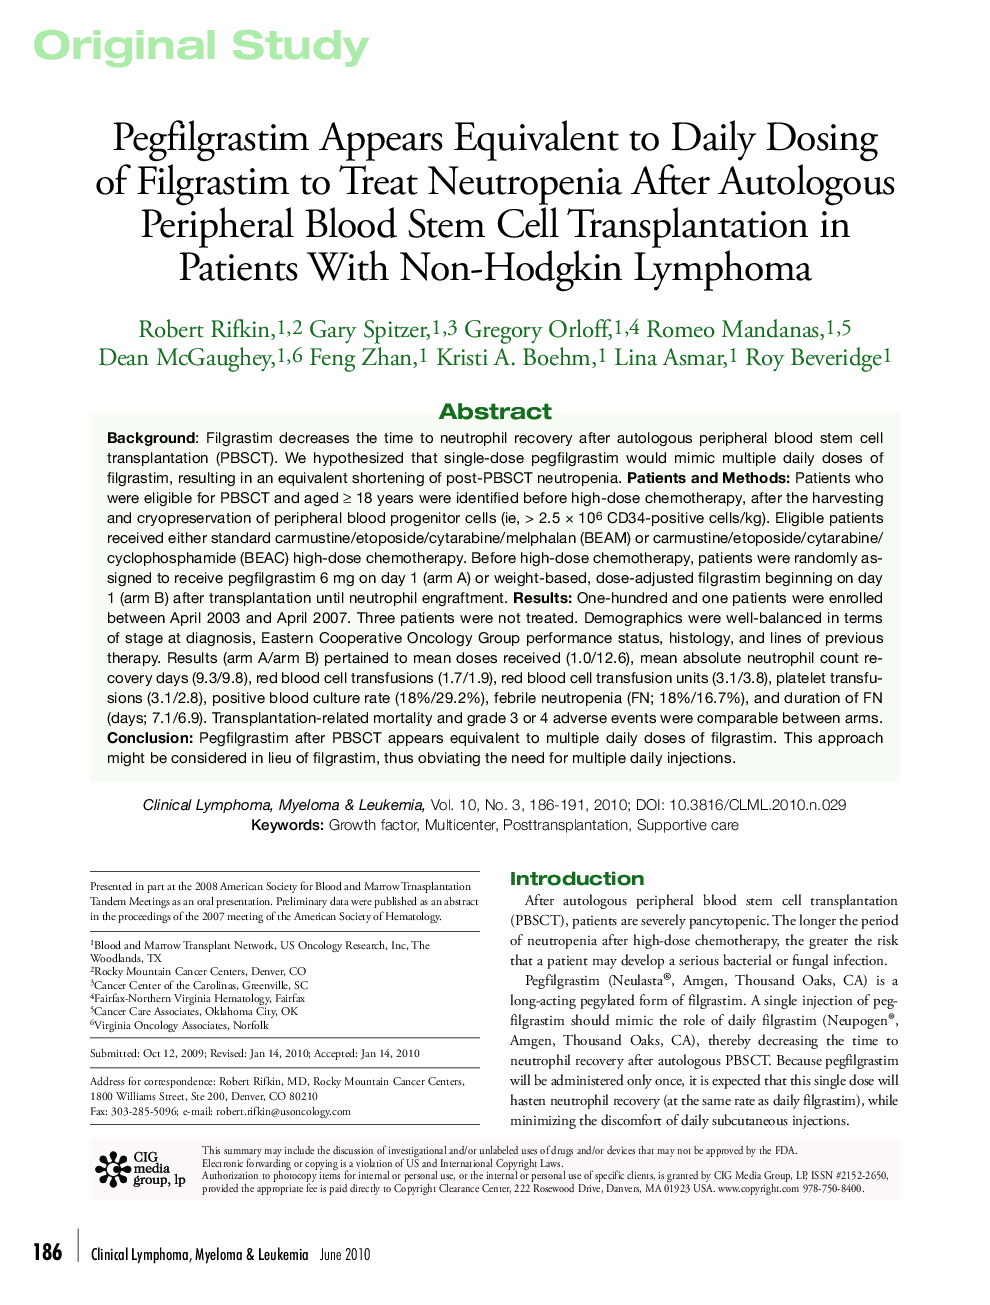 Pegfilgrastim Appears Equivalent to Daily Dosing of Filgrastim to Treat Neutropenia After Autologous Peripheral Blood Stem Cell Transplantation in Patients With Non-Hodgkin Lymphoma 